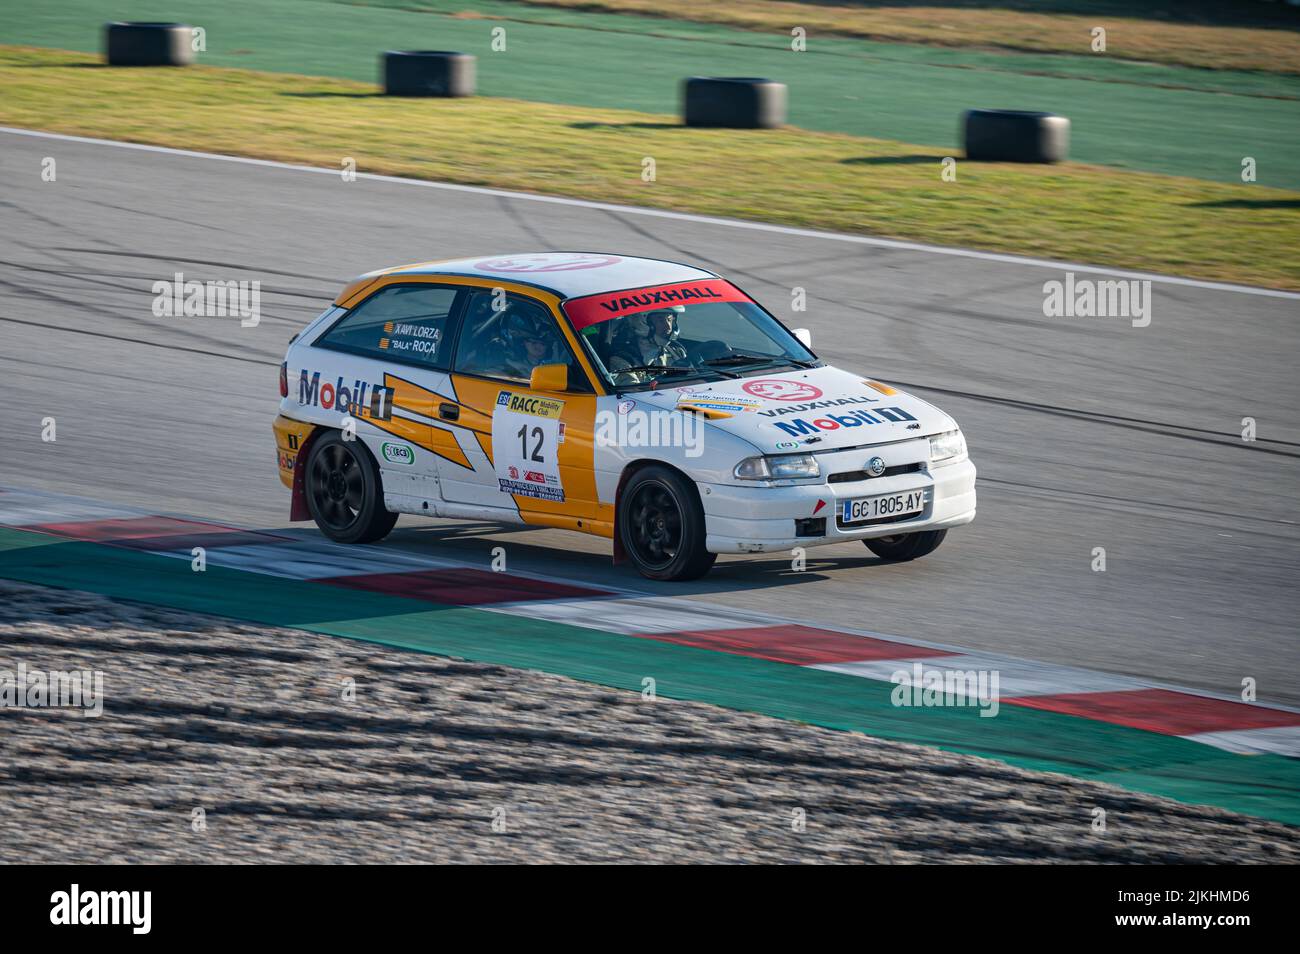 Barcelona, Spain; December 20, 2021: Opel Astra MKI Racing car in the track of Montmelo Stock Photo